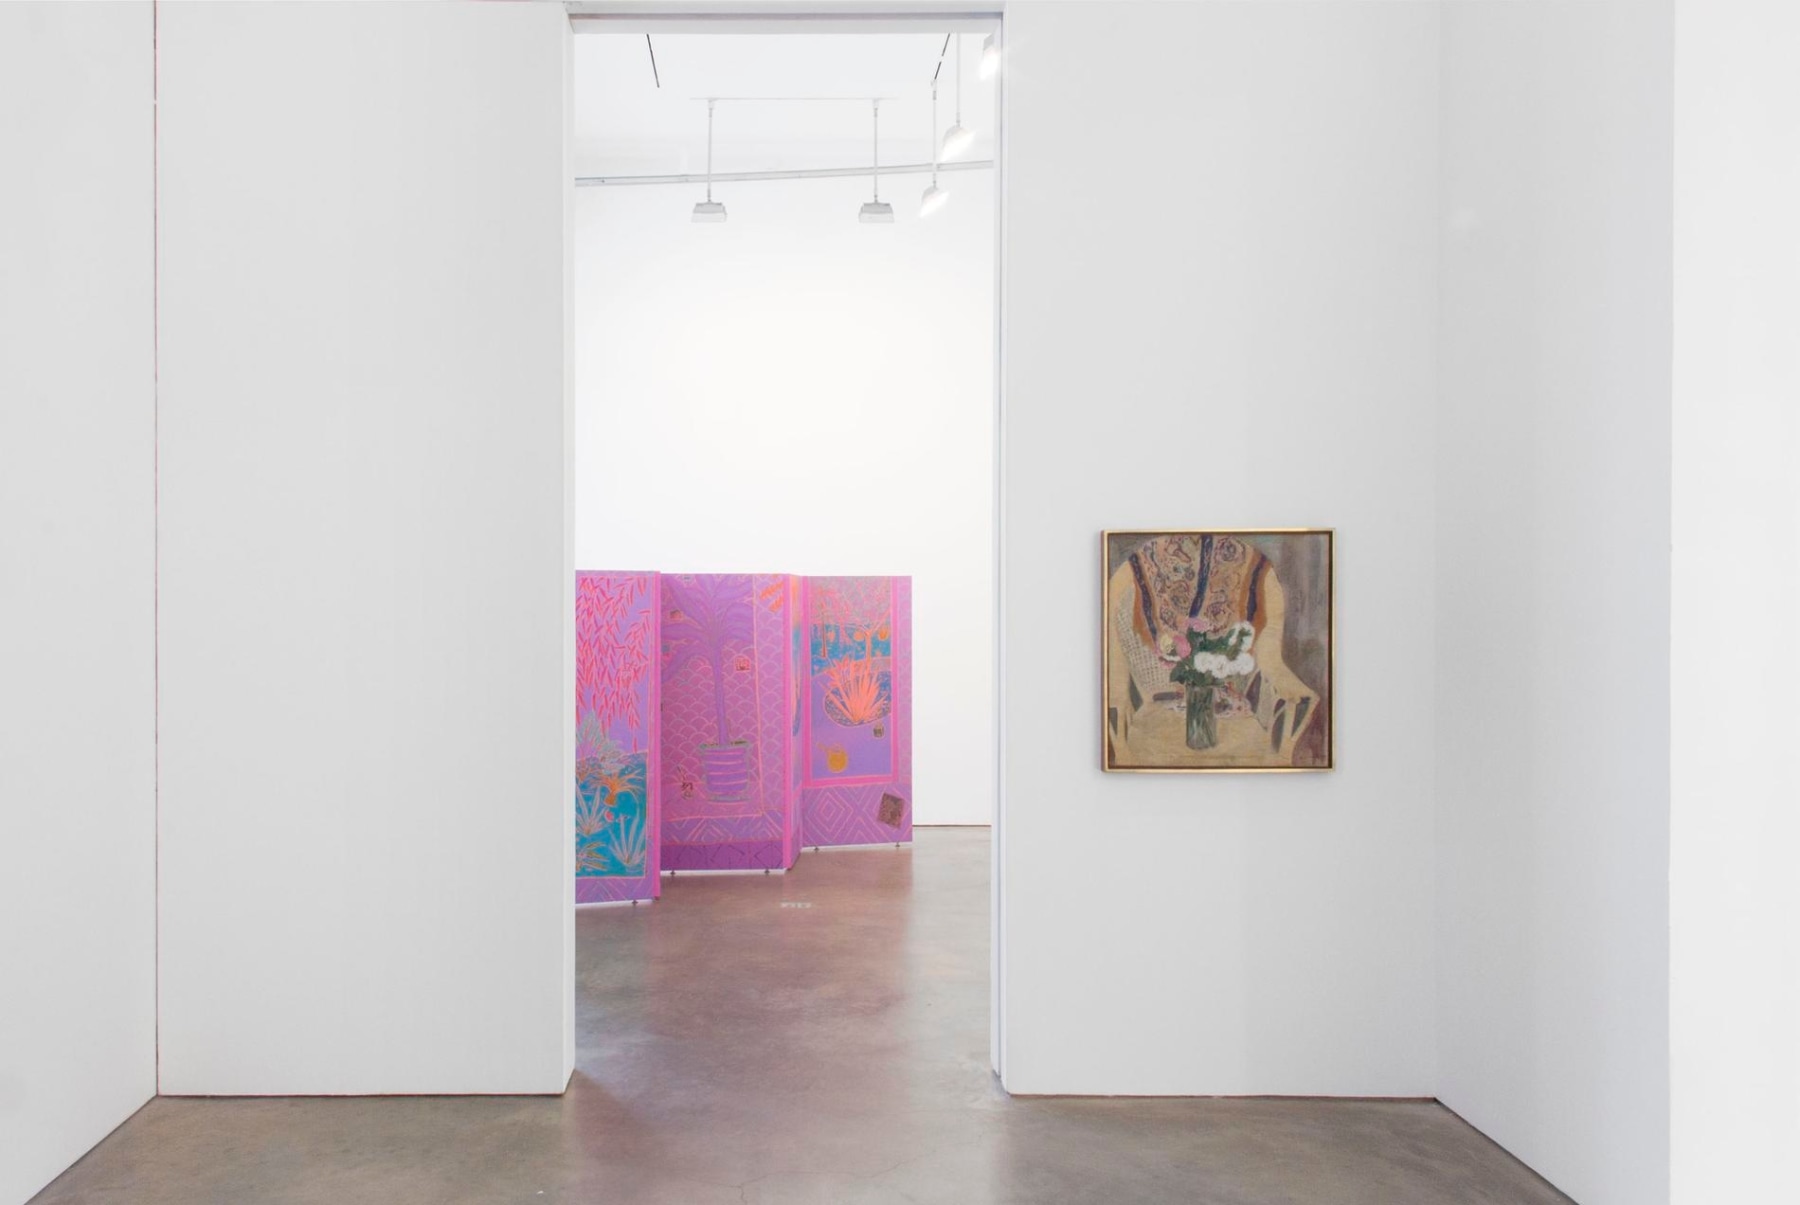 Installation view of several artworks